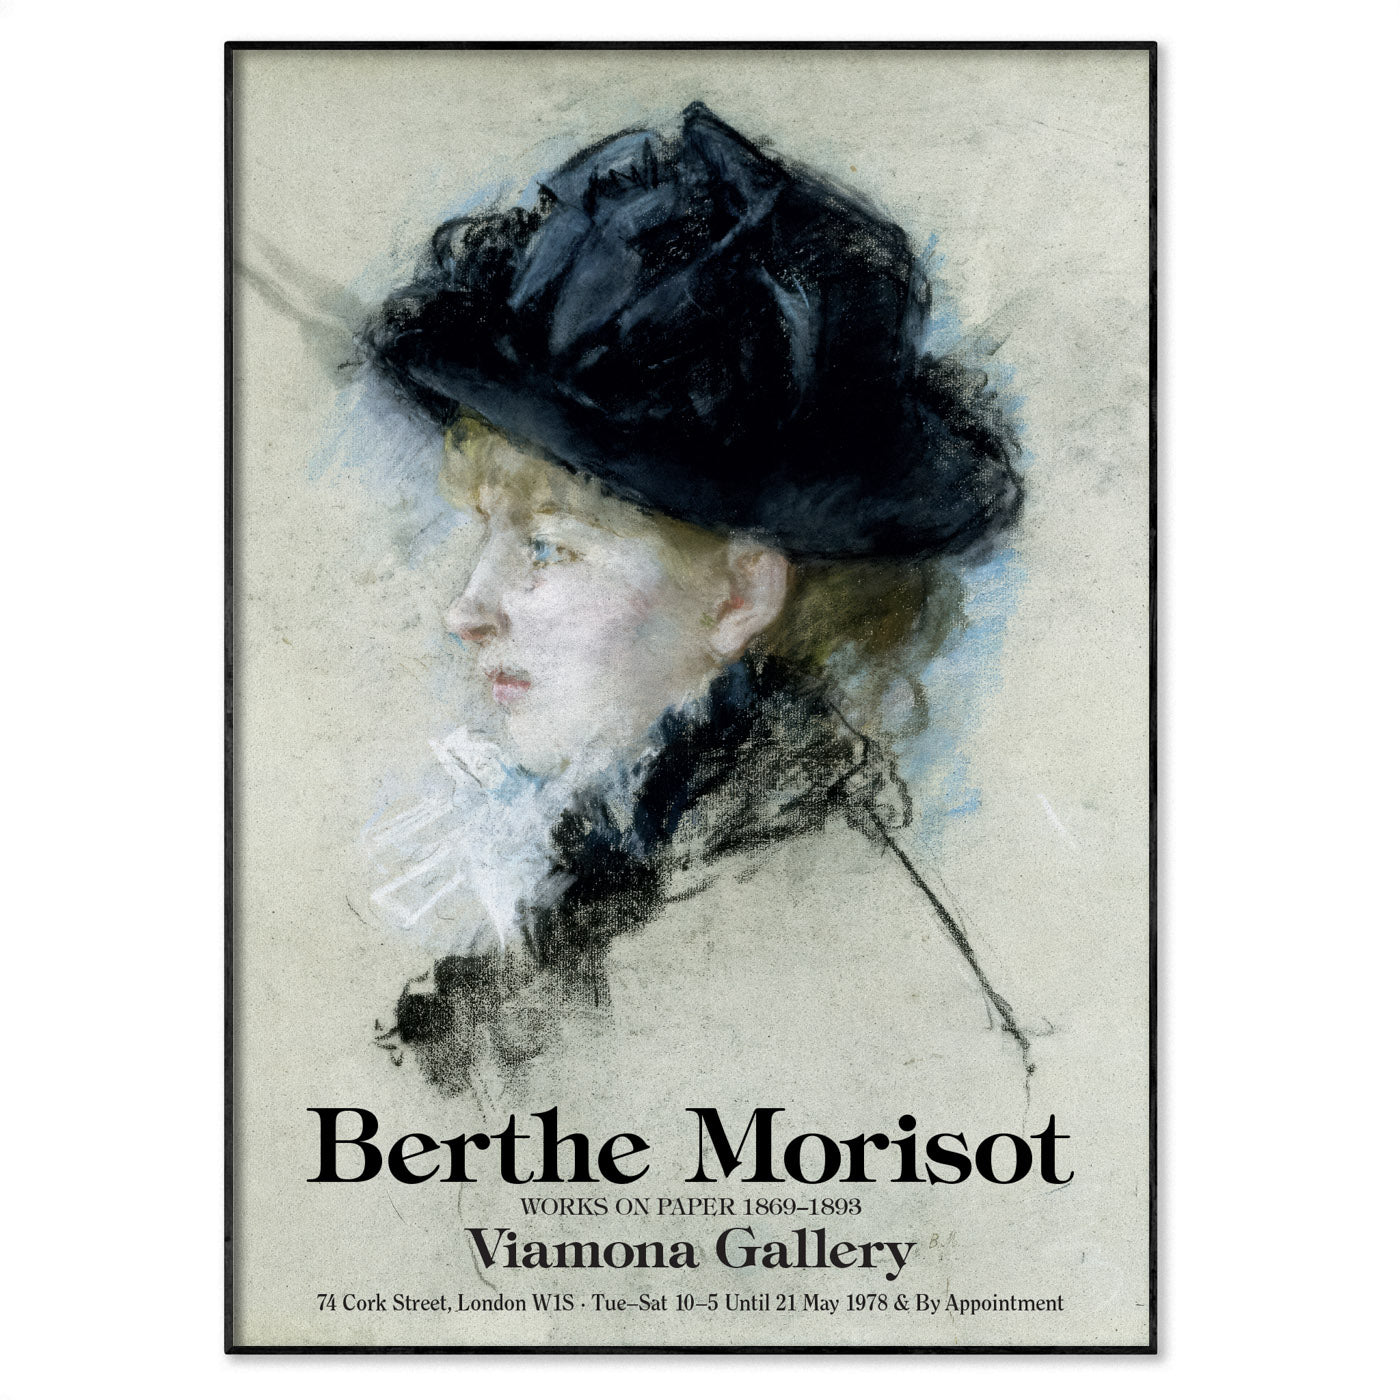 1970s exhibition poster of French Impressionist Berthe Morisot, showcasing her pastel drawings